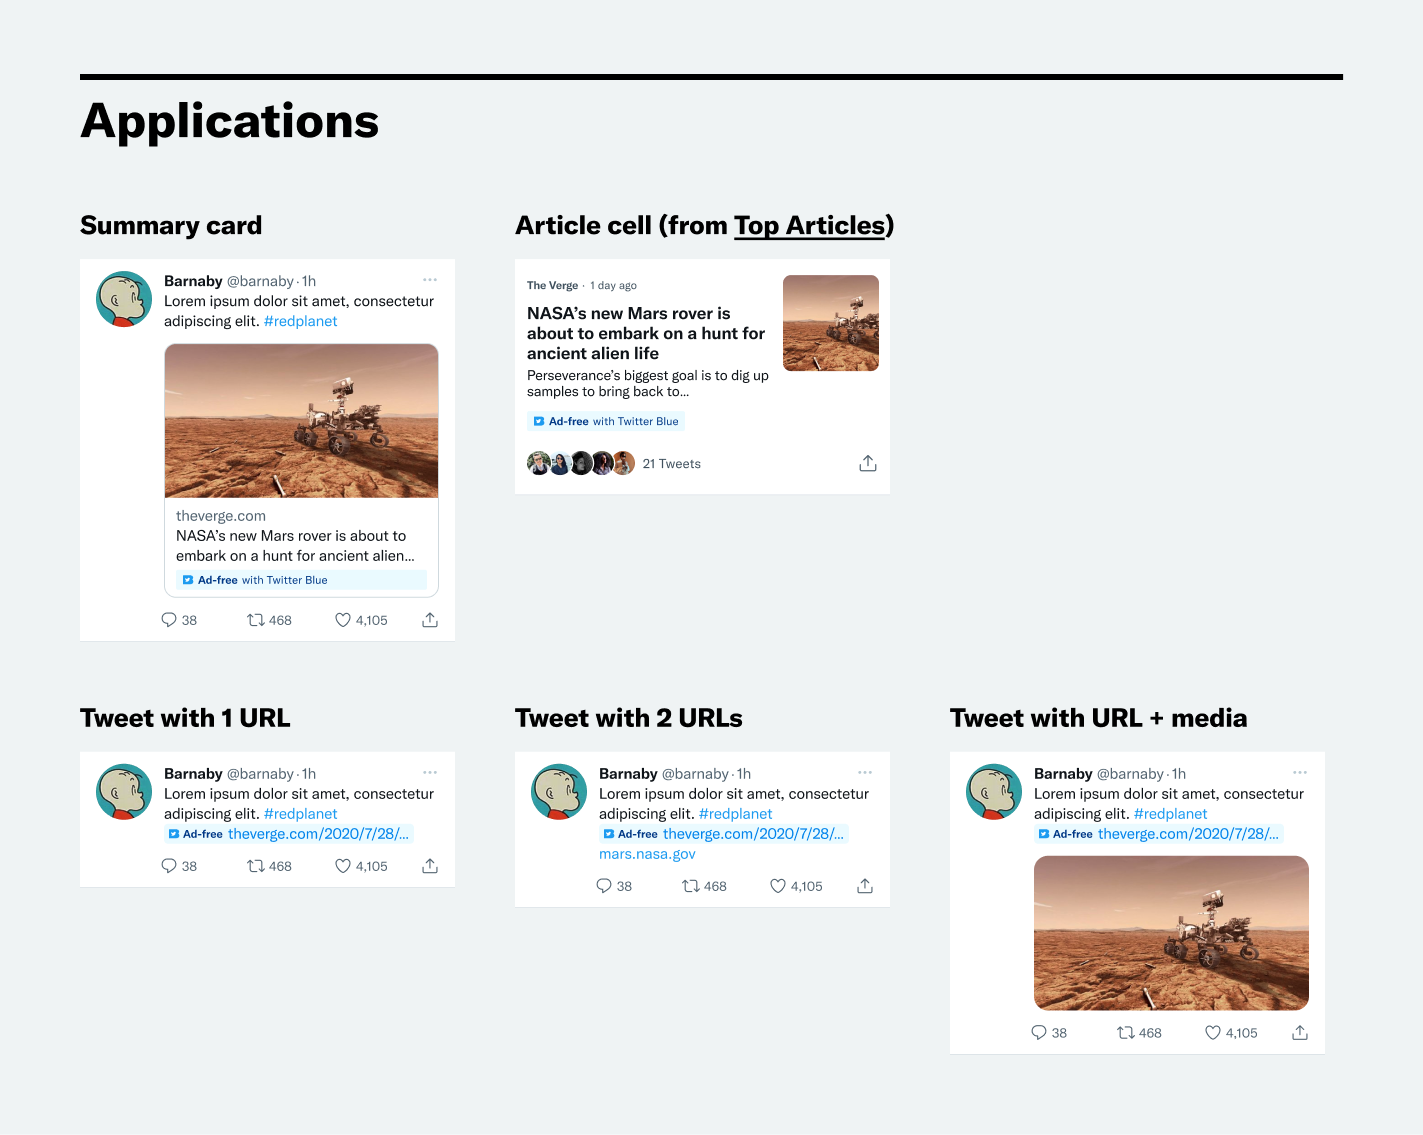 Ad-free Articles label applications